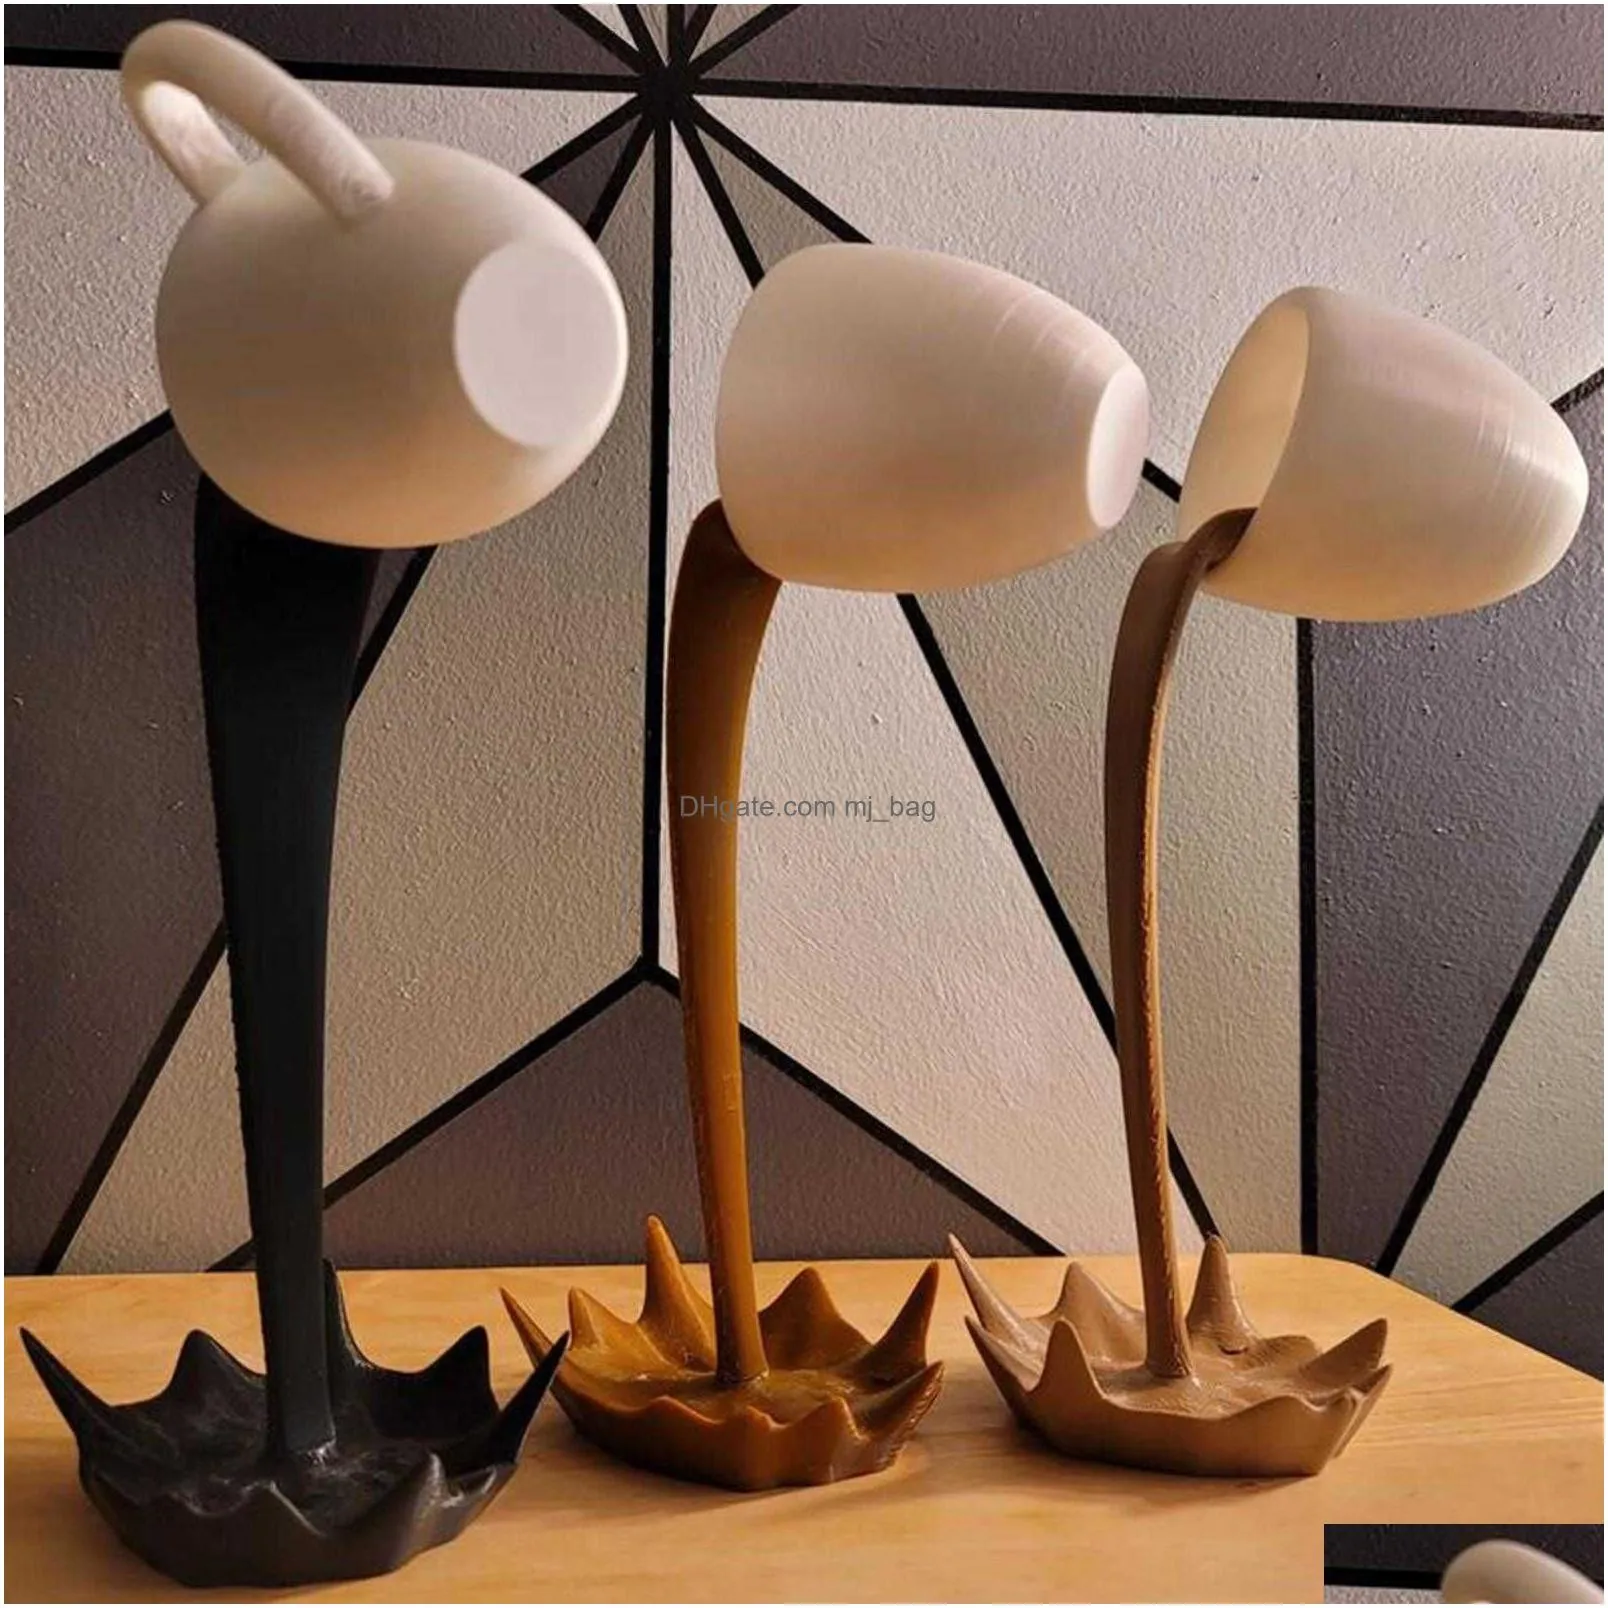 Decorative Objects & Figurines Floating Spilling Coffee Cup Scpture Kitchen Decoration Magic Pouring Splash Creative Desktop Decor Hom Dh6Oq